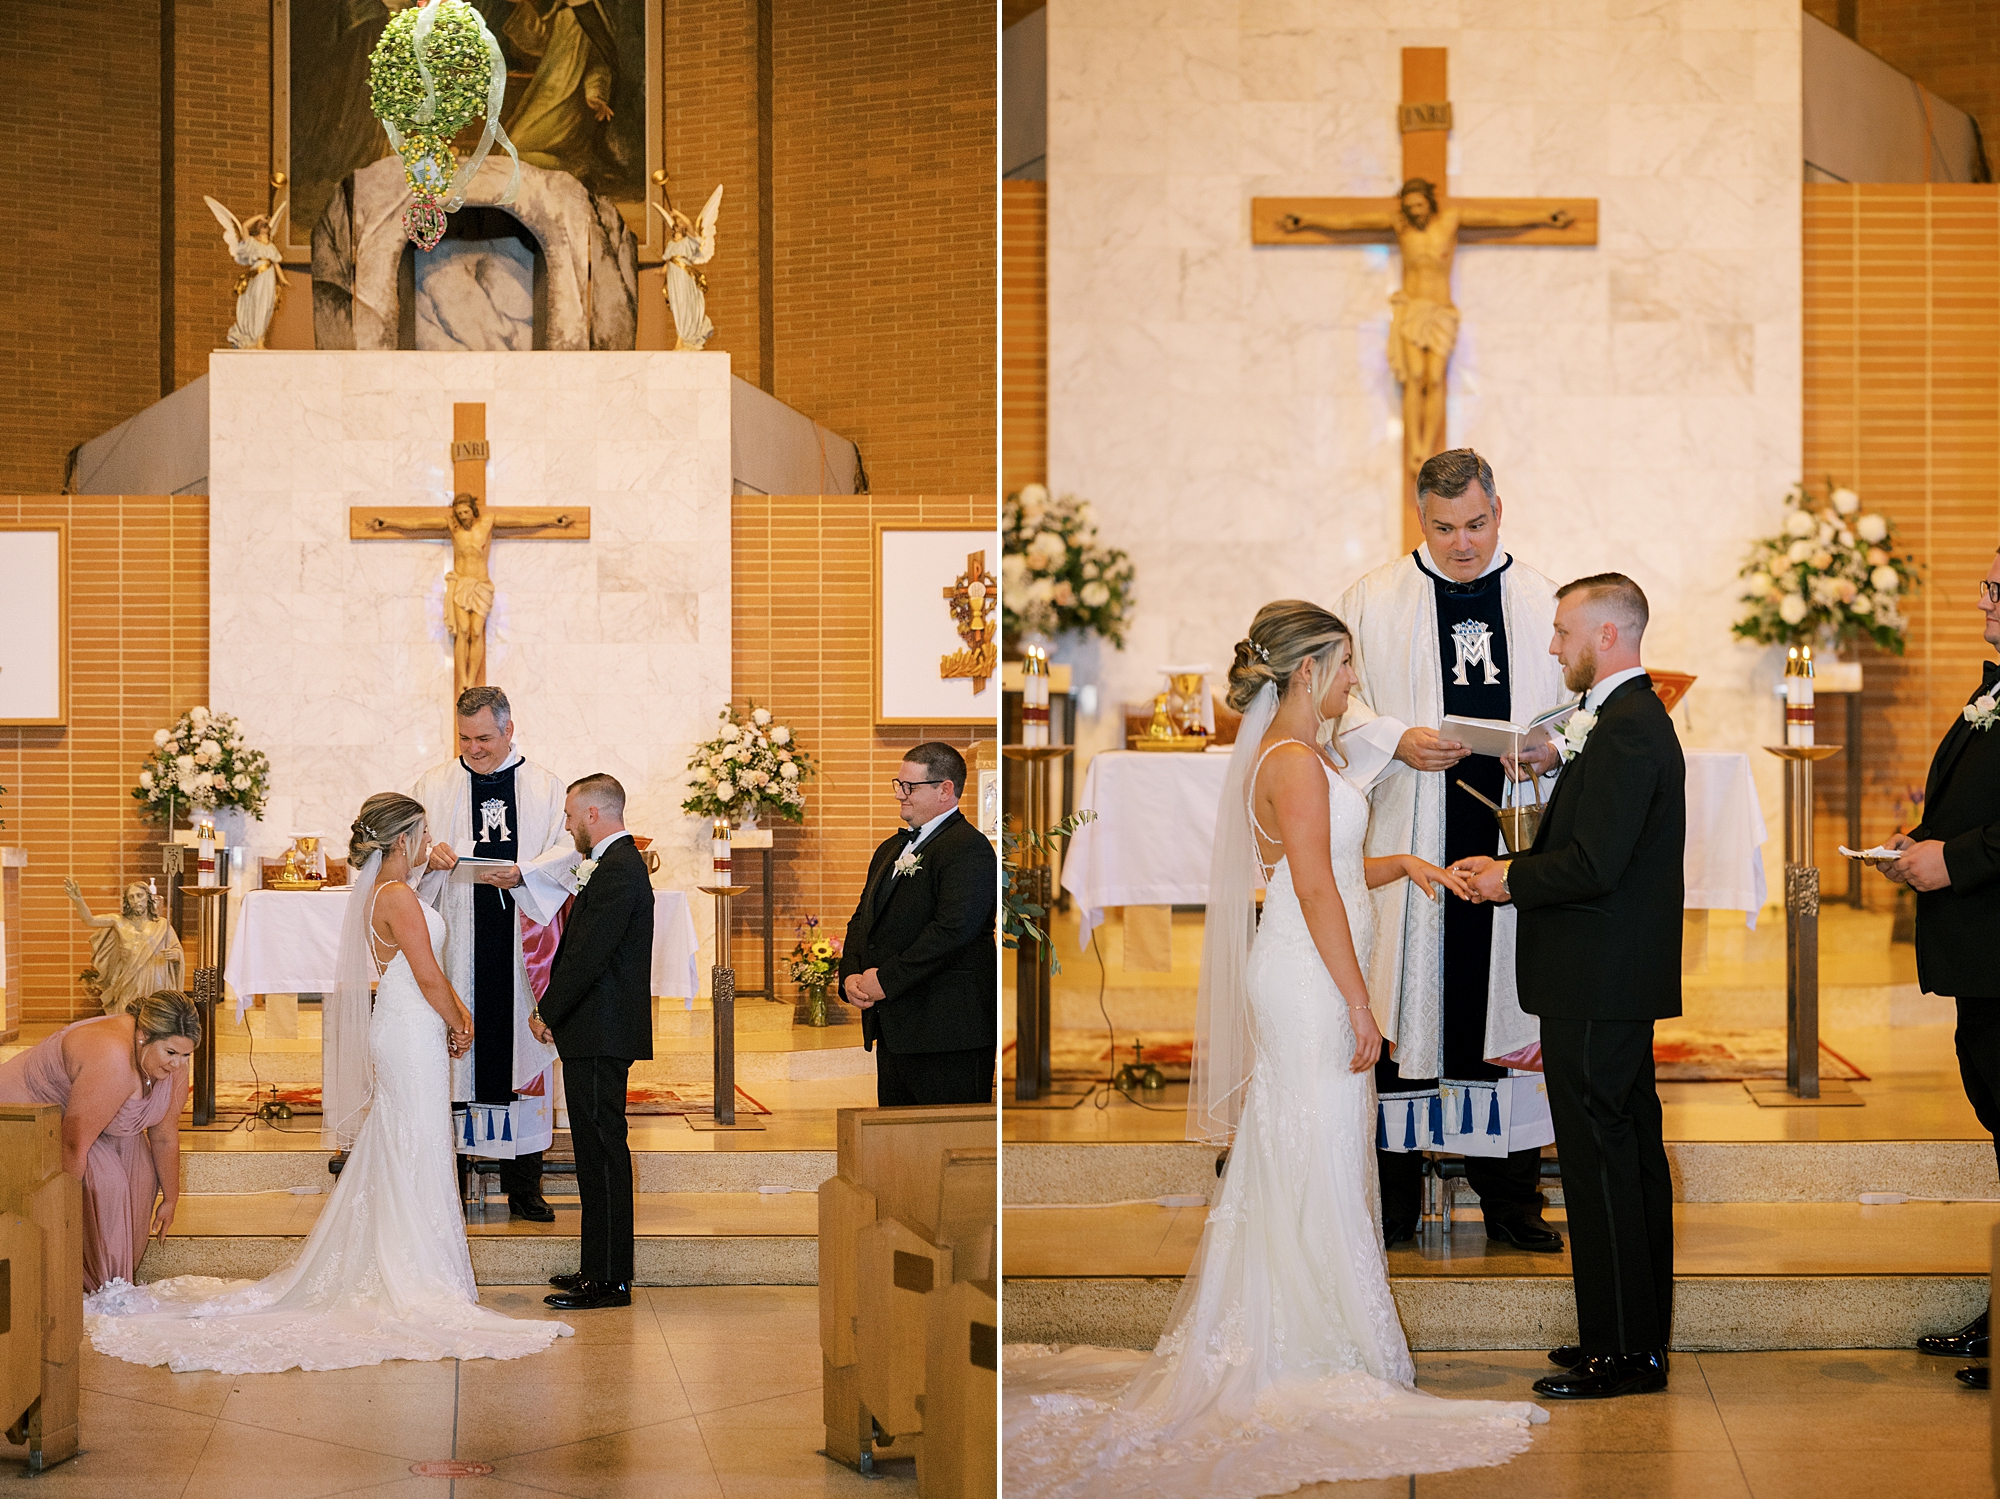 bride and groom stand at alter during traditional church wedding ceremony in New Jersey